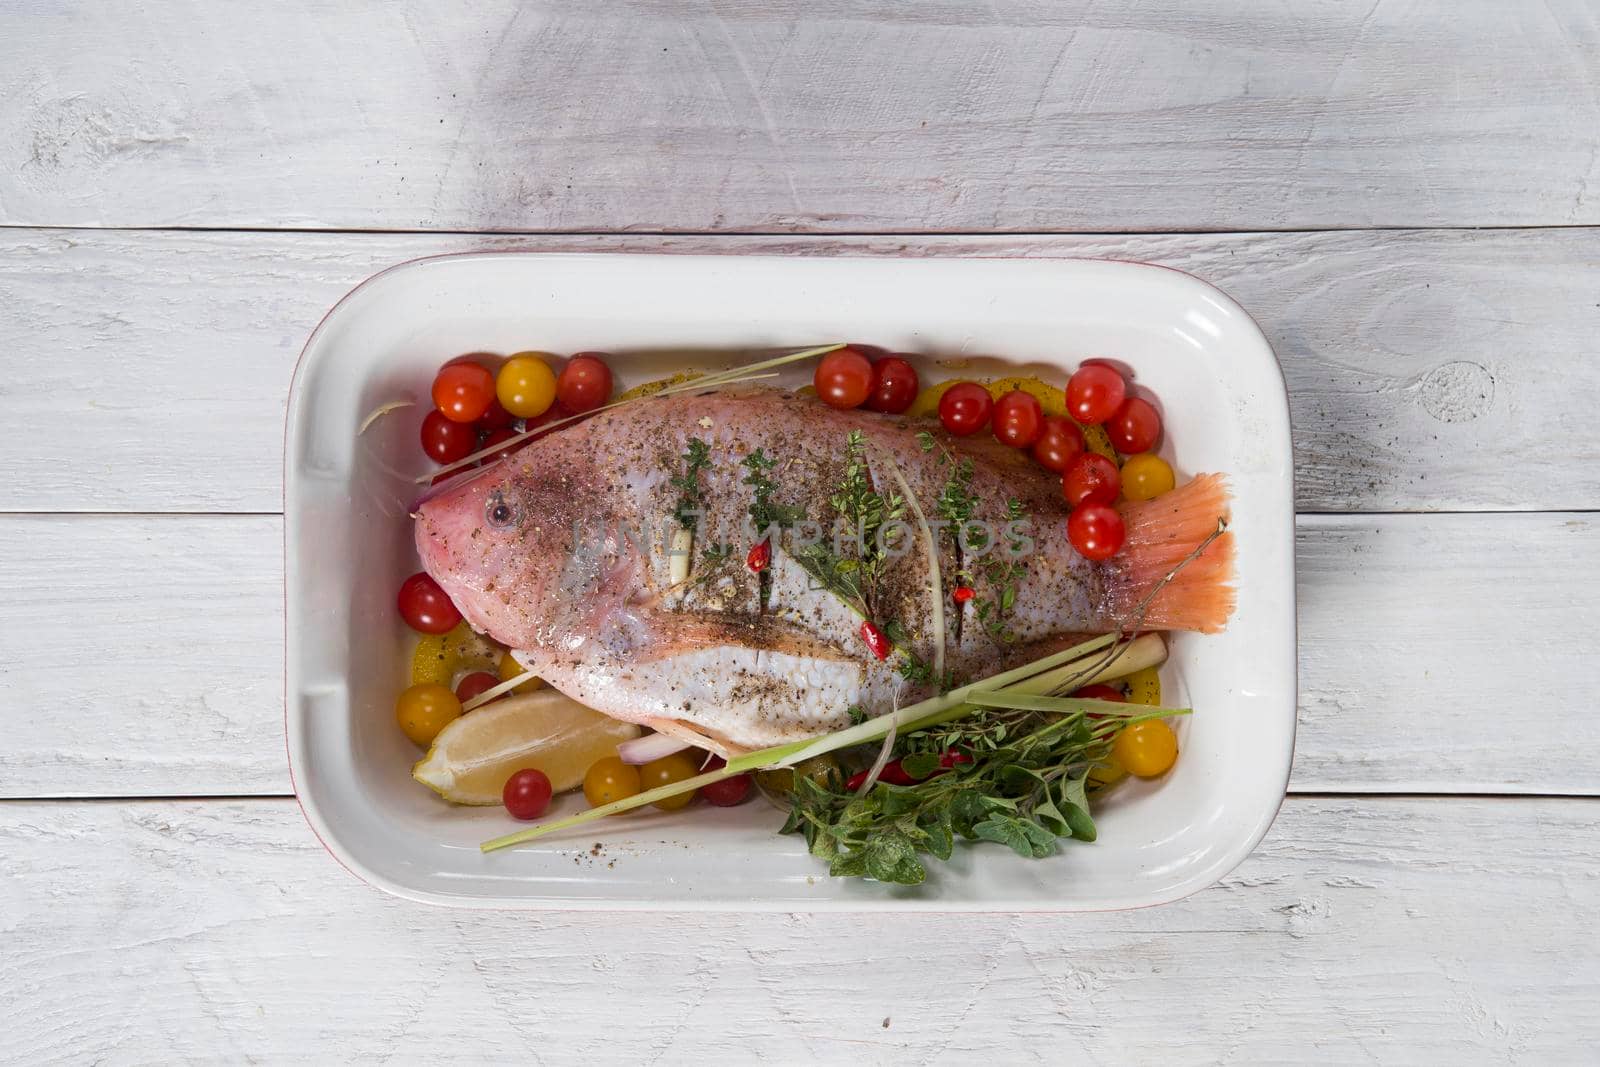 raw pink tilapia fish with vegetables in a baking dish, hands spice on the fish, step by step recipe for white wooden planks,High quality photo